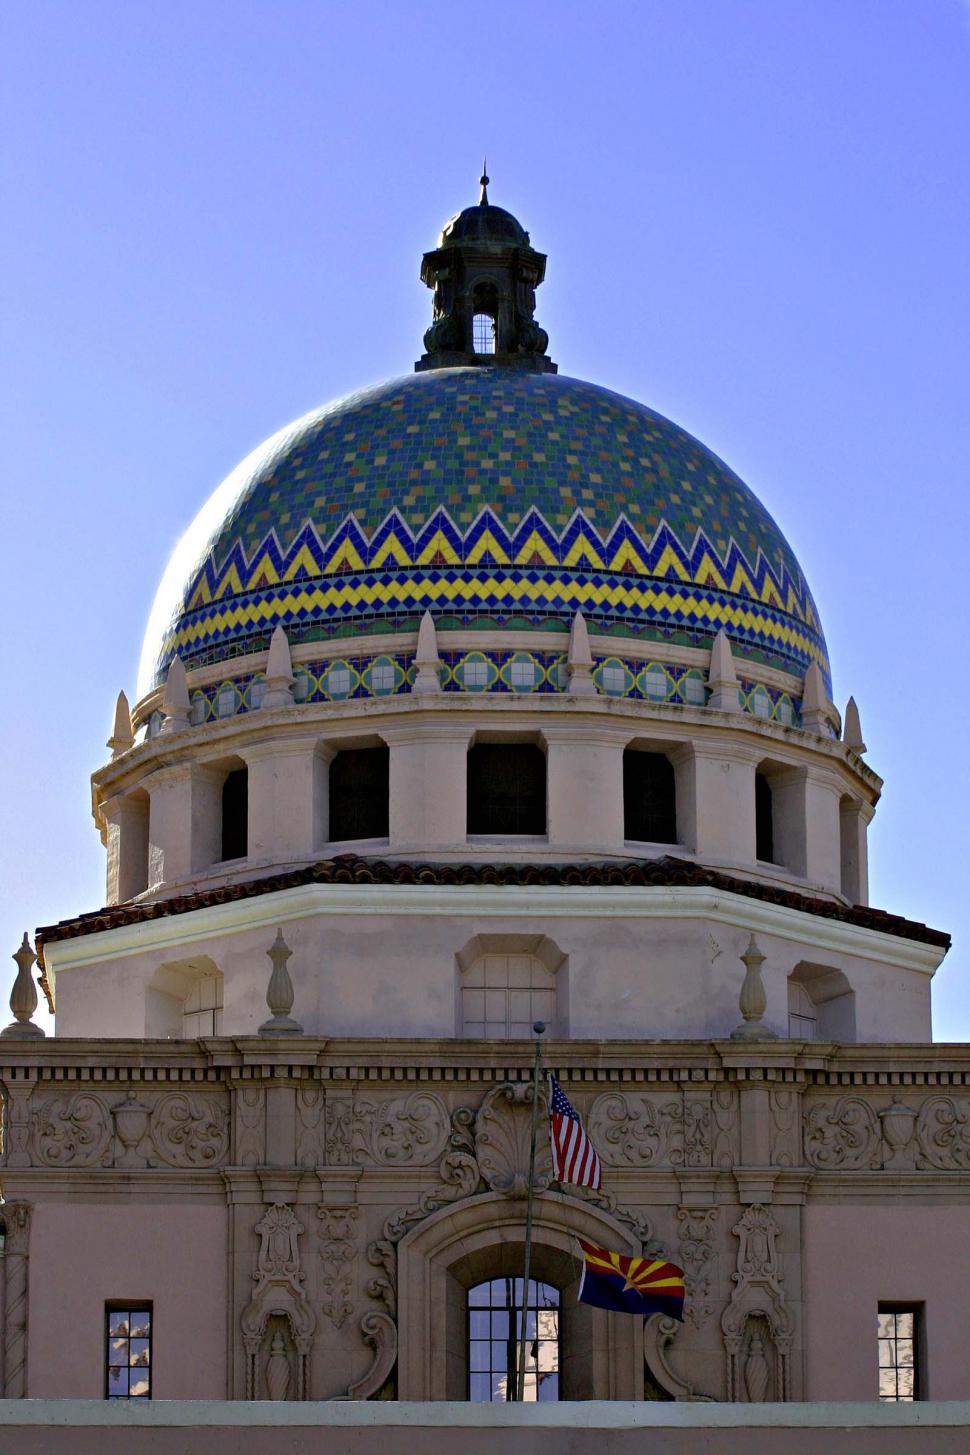 Free Image of Old Pima County courthouse 